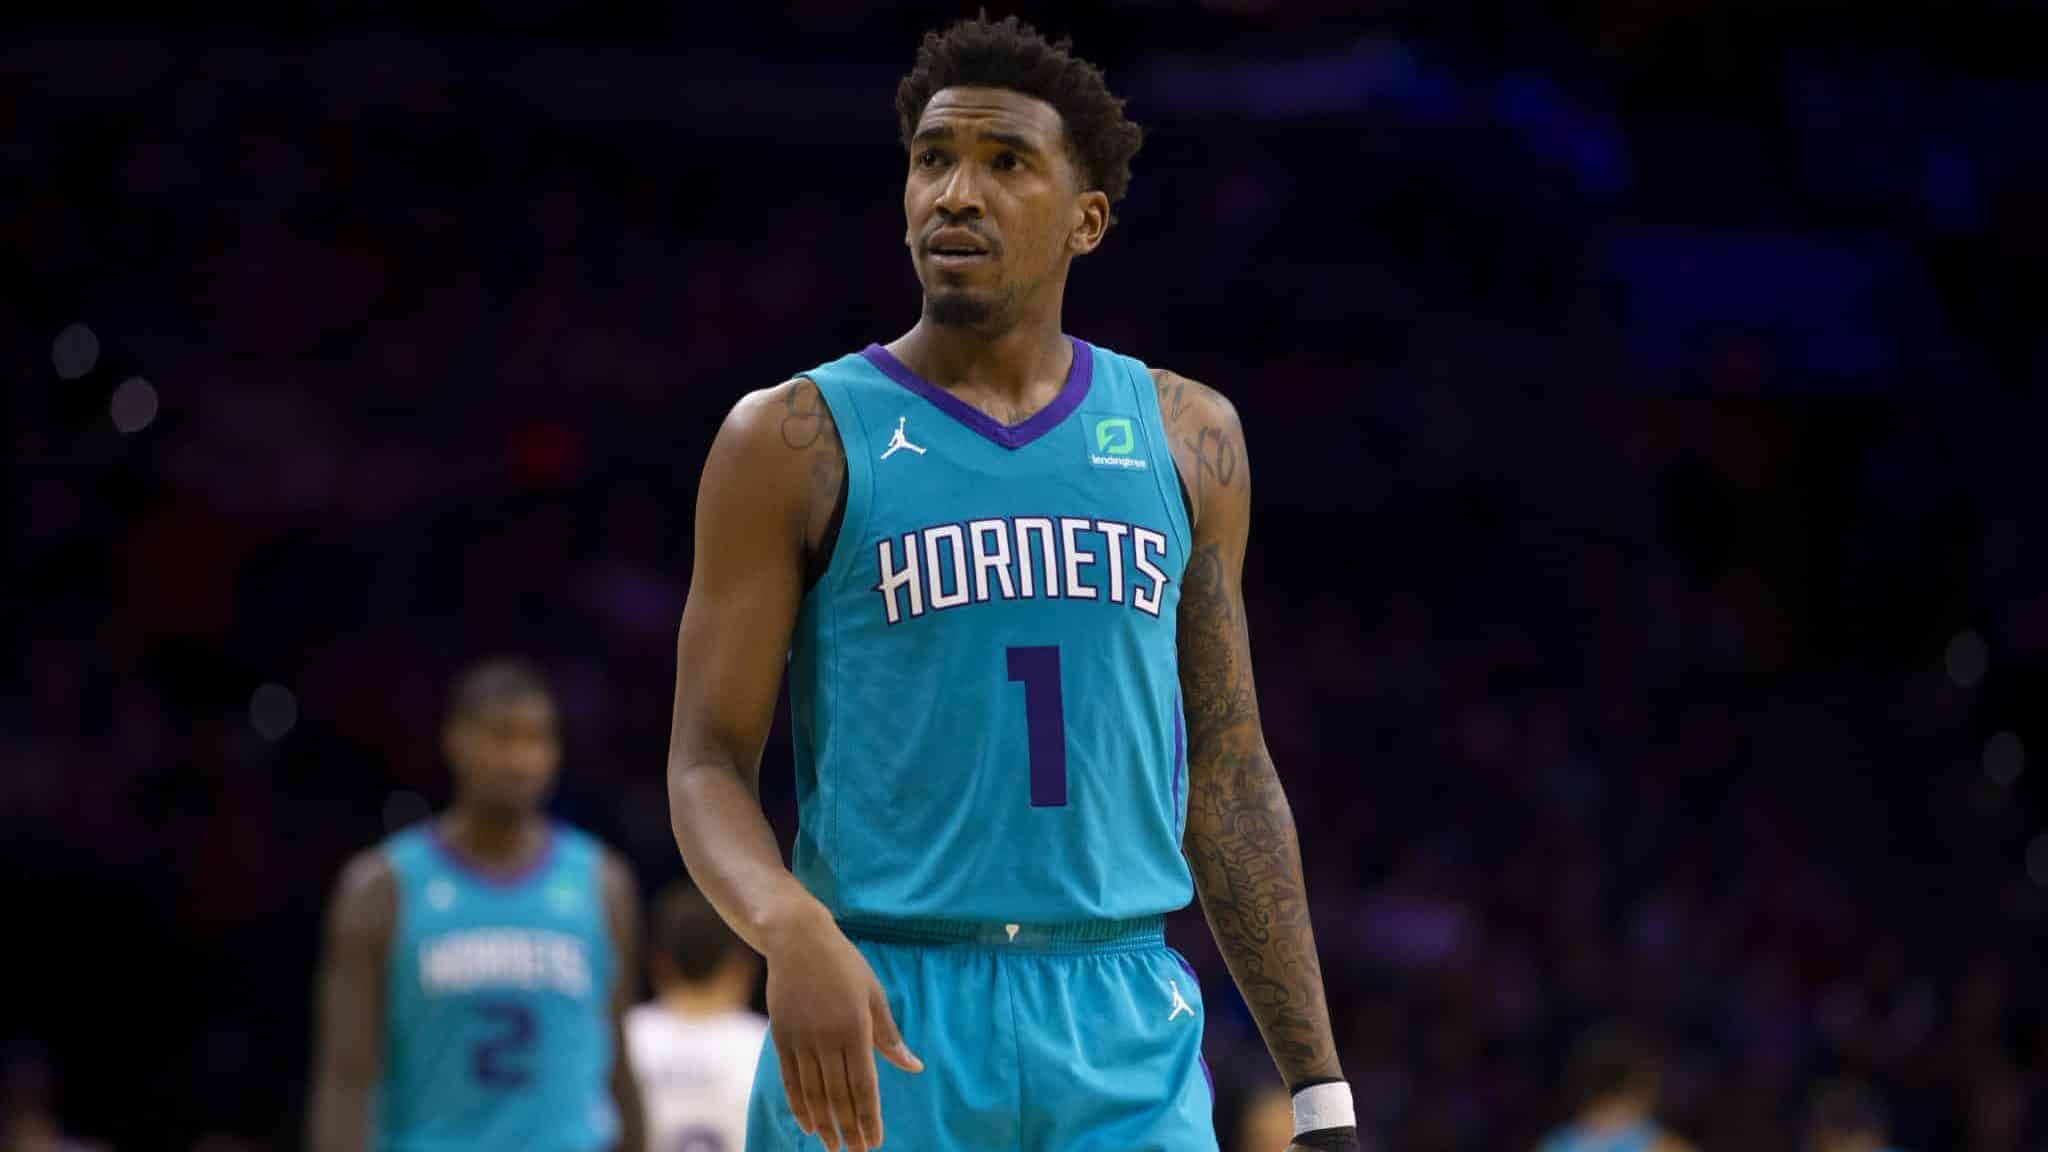 PHILADELPHIA, PA - NOVEMBER 10: Malik Monk #1 of the Charlotte Hornets looks on against the Philadelphia 76ers at the Wells Fargo Center on November 10, 2019 in Philadelphia, Pennsylvania. The 76ers defeated the Hornets 114-106. NOTE TO USER: User expressly acknowledges and agrees that, by downloading and/or using this photograph, user is consenting to the terms and conditions of the Getty Images License Agreement.